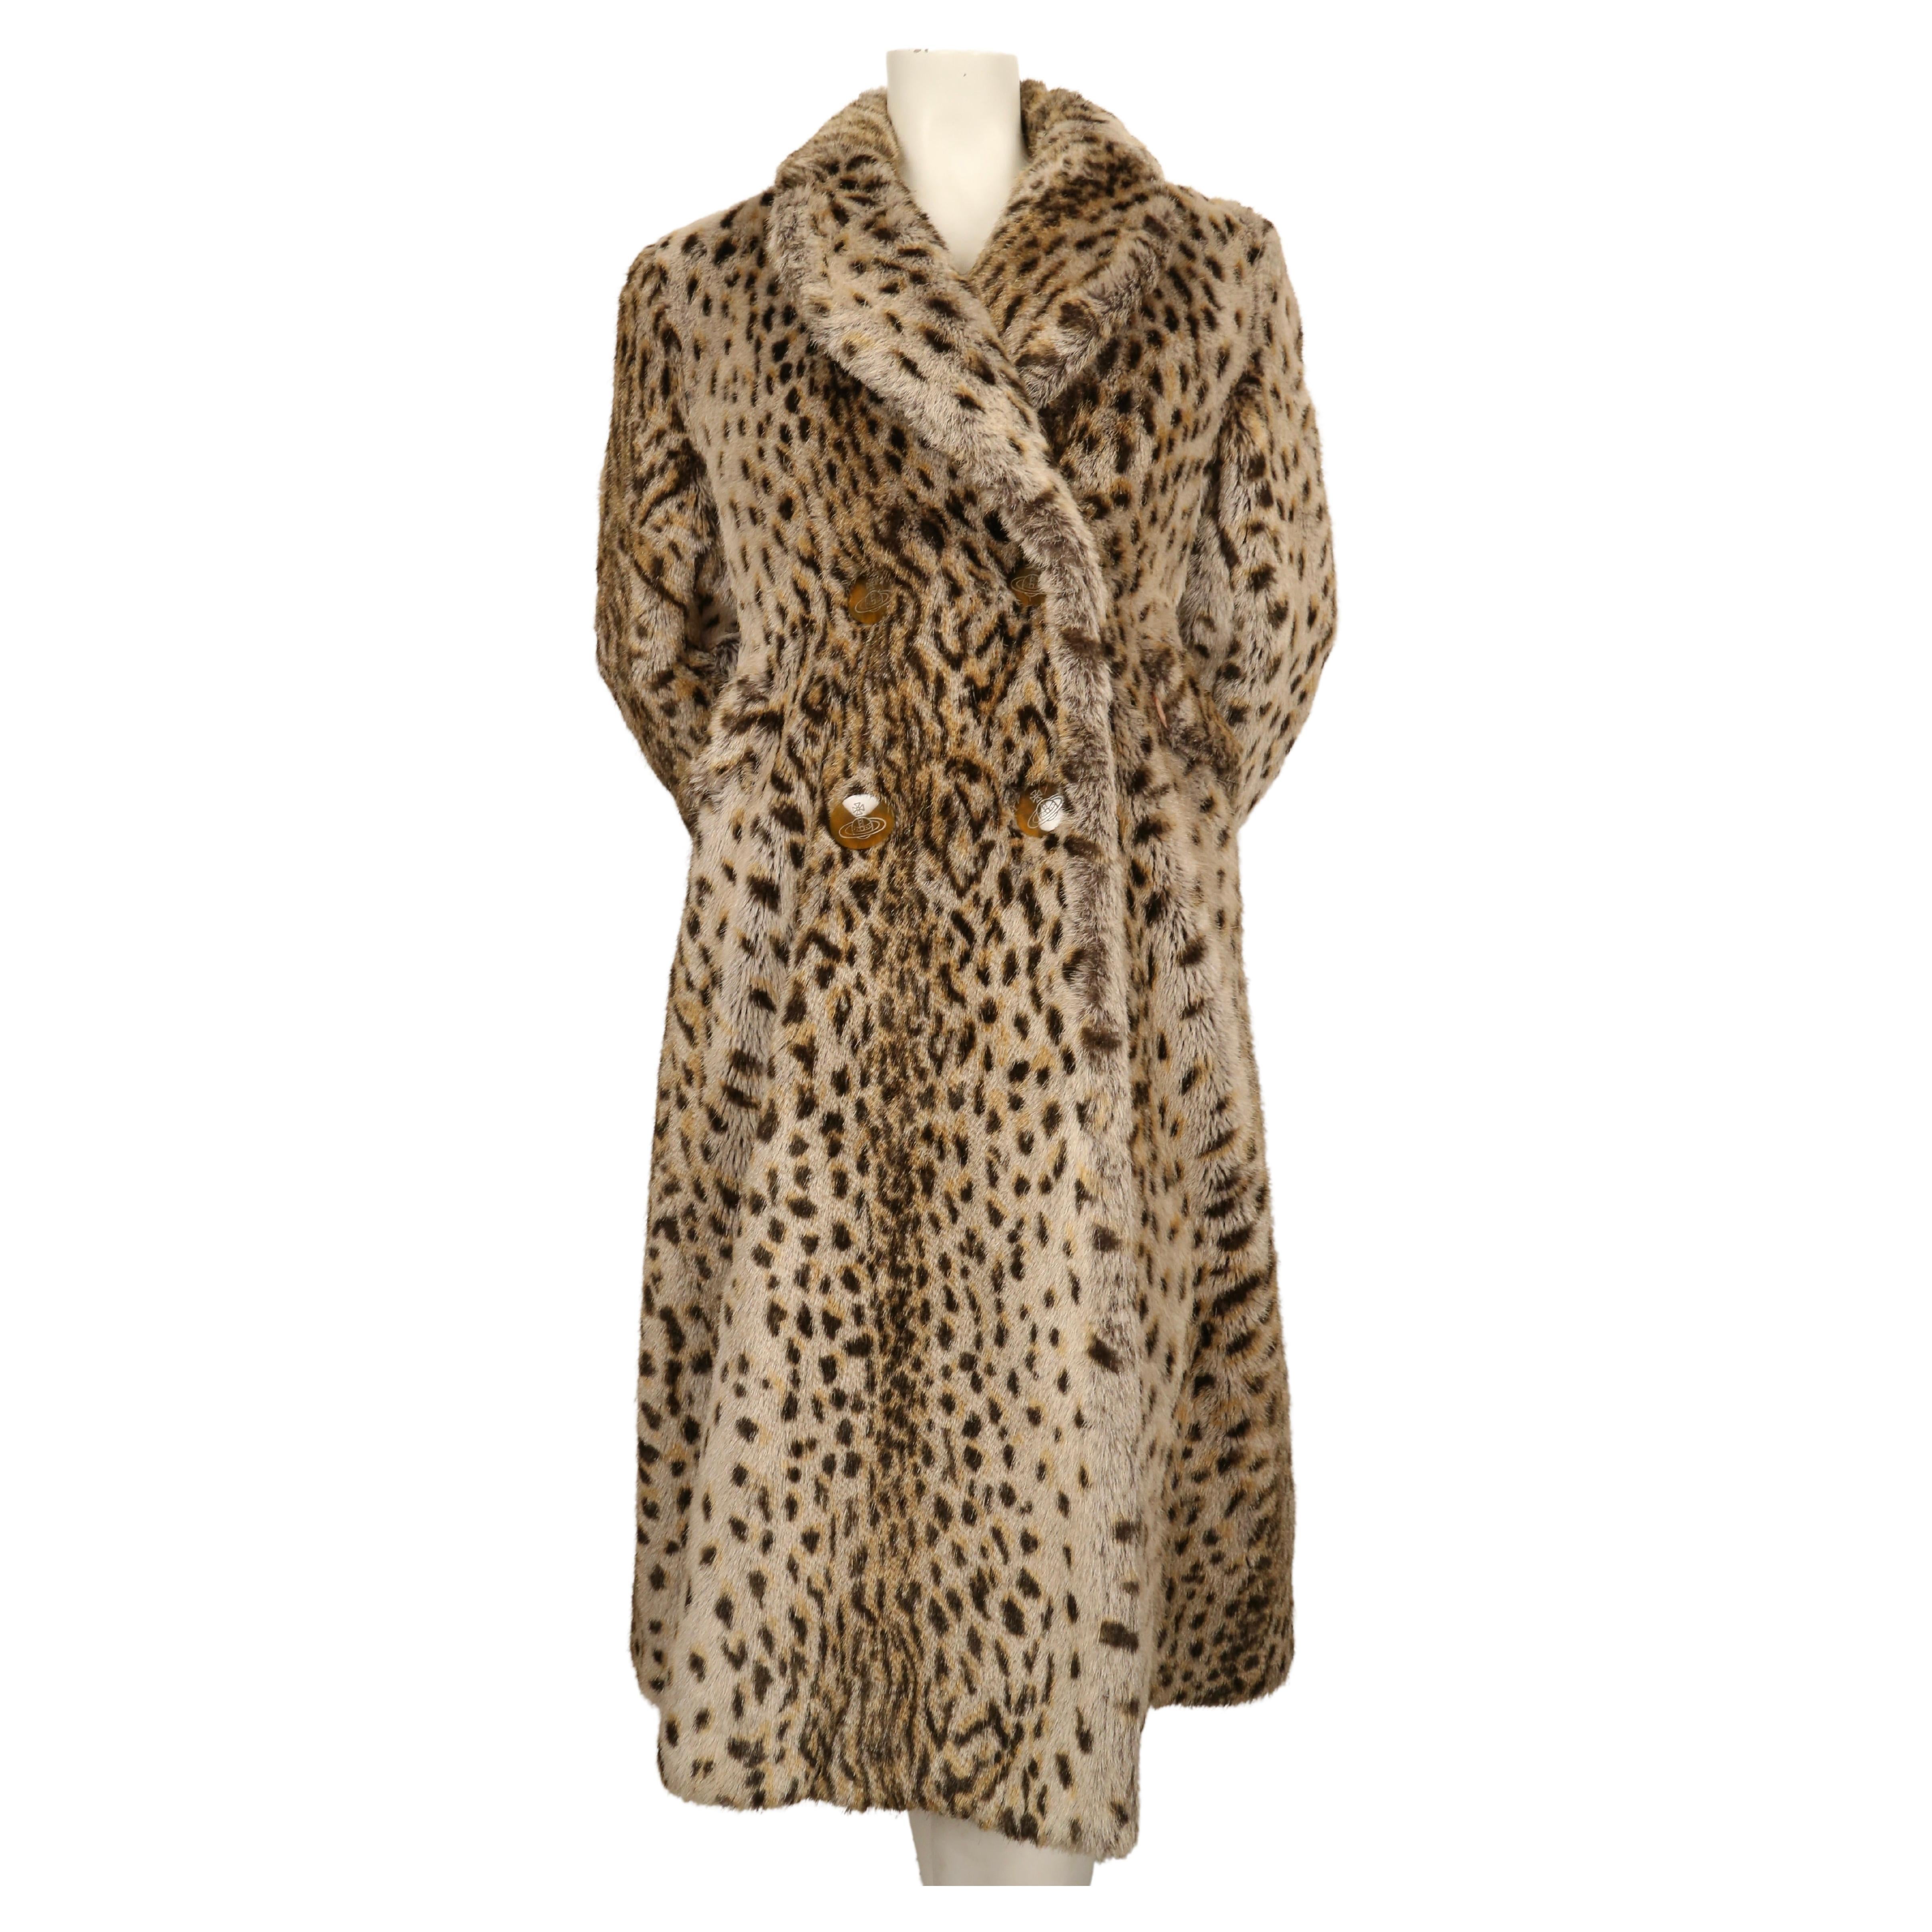 Very rare, faux fur leopard coat with signature orb buttons designed by Vivienne Westwood dating to fall of 1988 as seen on the 'Time Machine' runway.  Coat has a really great silhouette and is very heavy for cold weather.  Coat is labeled a UK size